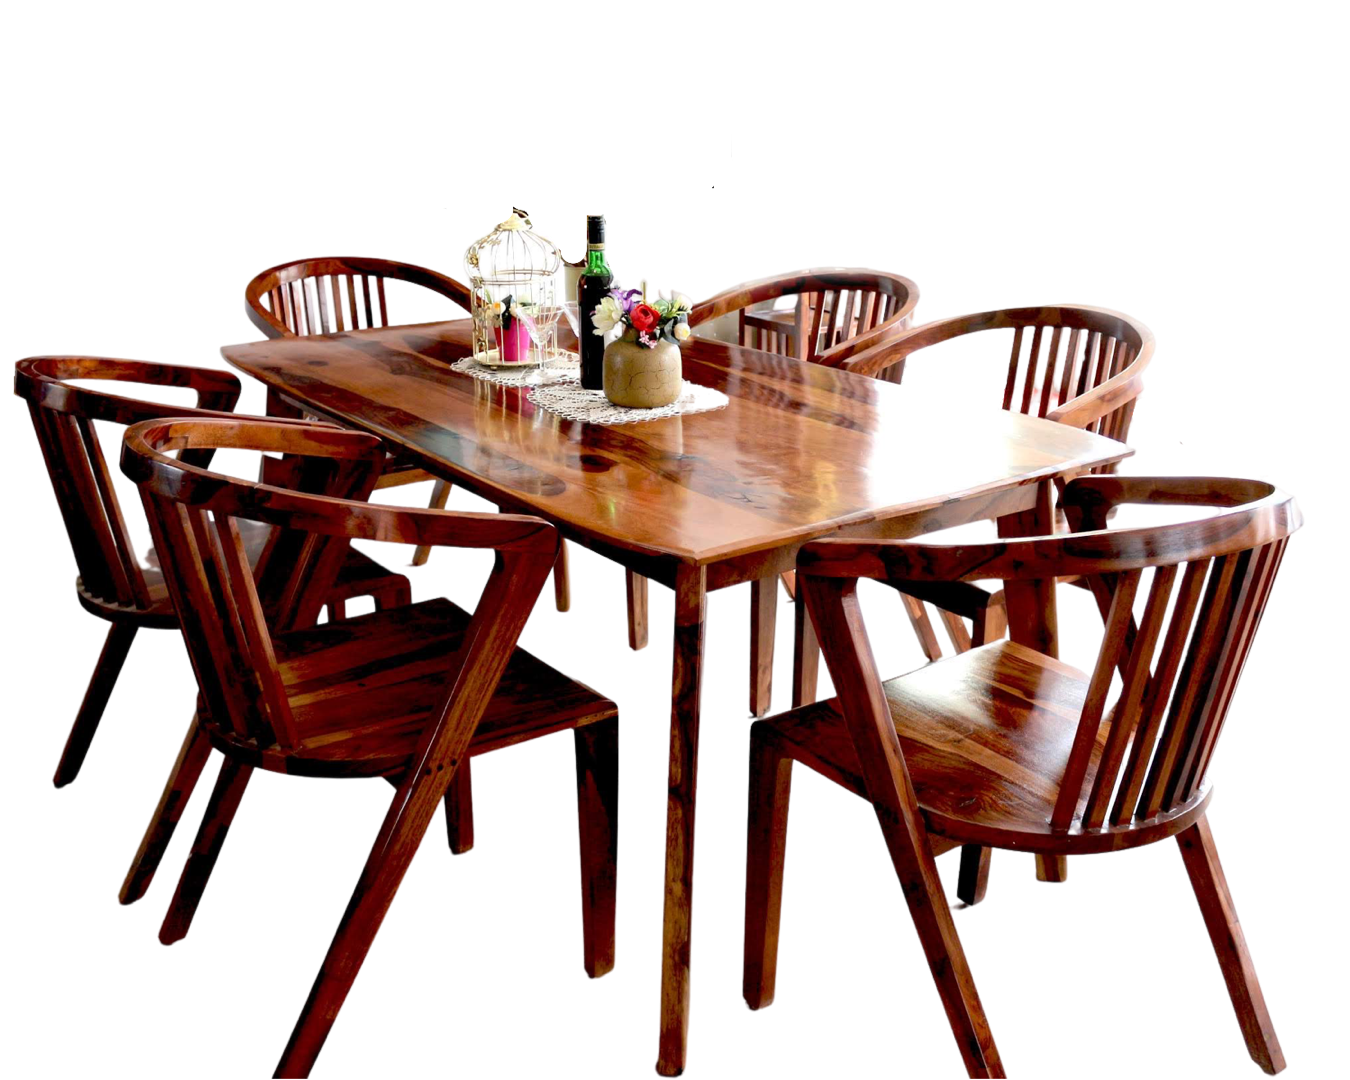 Europa Solid Wood Dining Set – dining set, designer dining table, dining table 6 seater, dining table 4 seater, wooden dining table, modern dining table, stylish luxury dining set, table chair for restaurant, 8 seater dining table